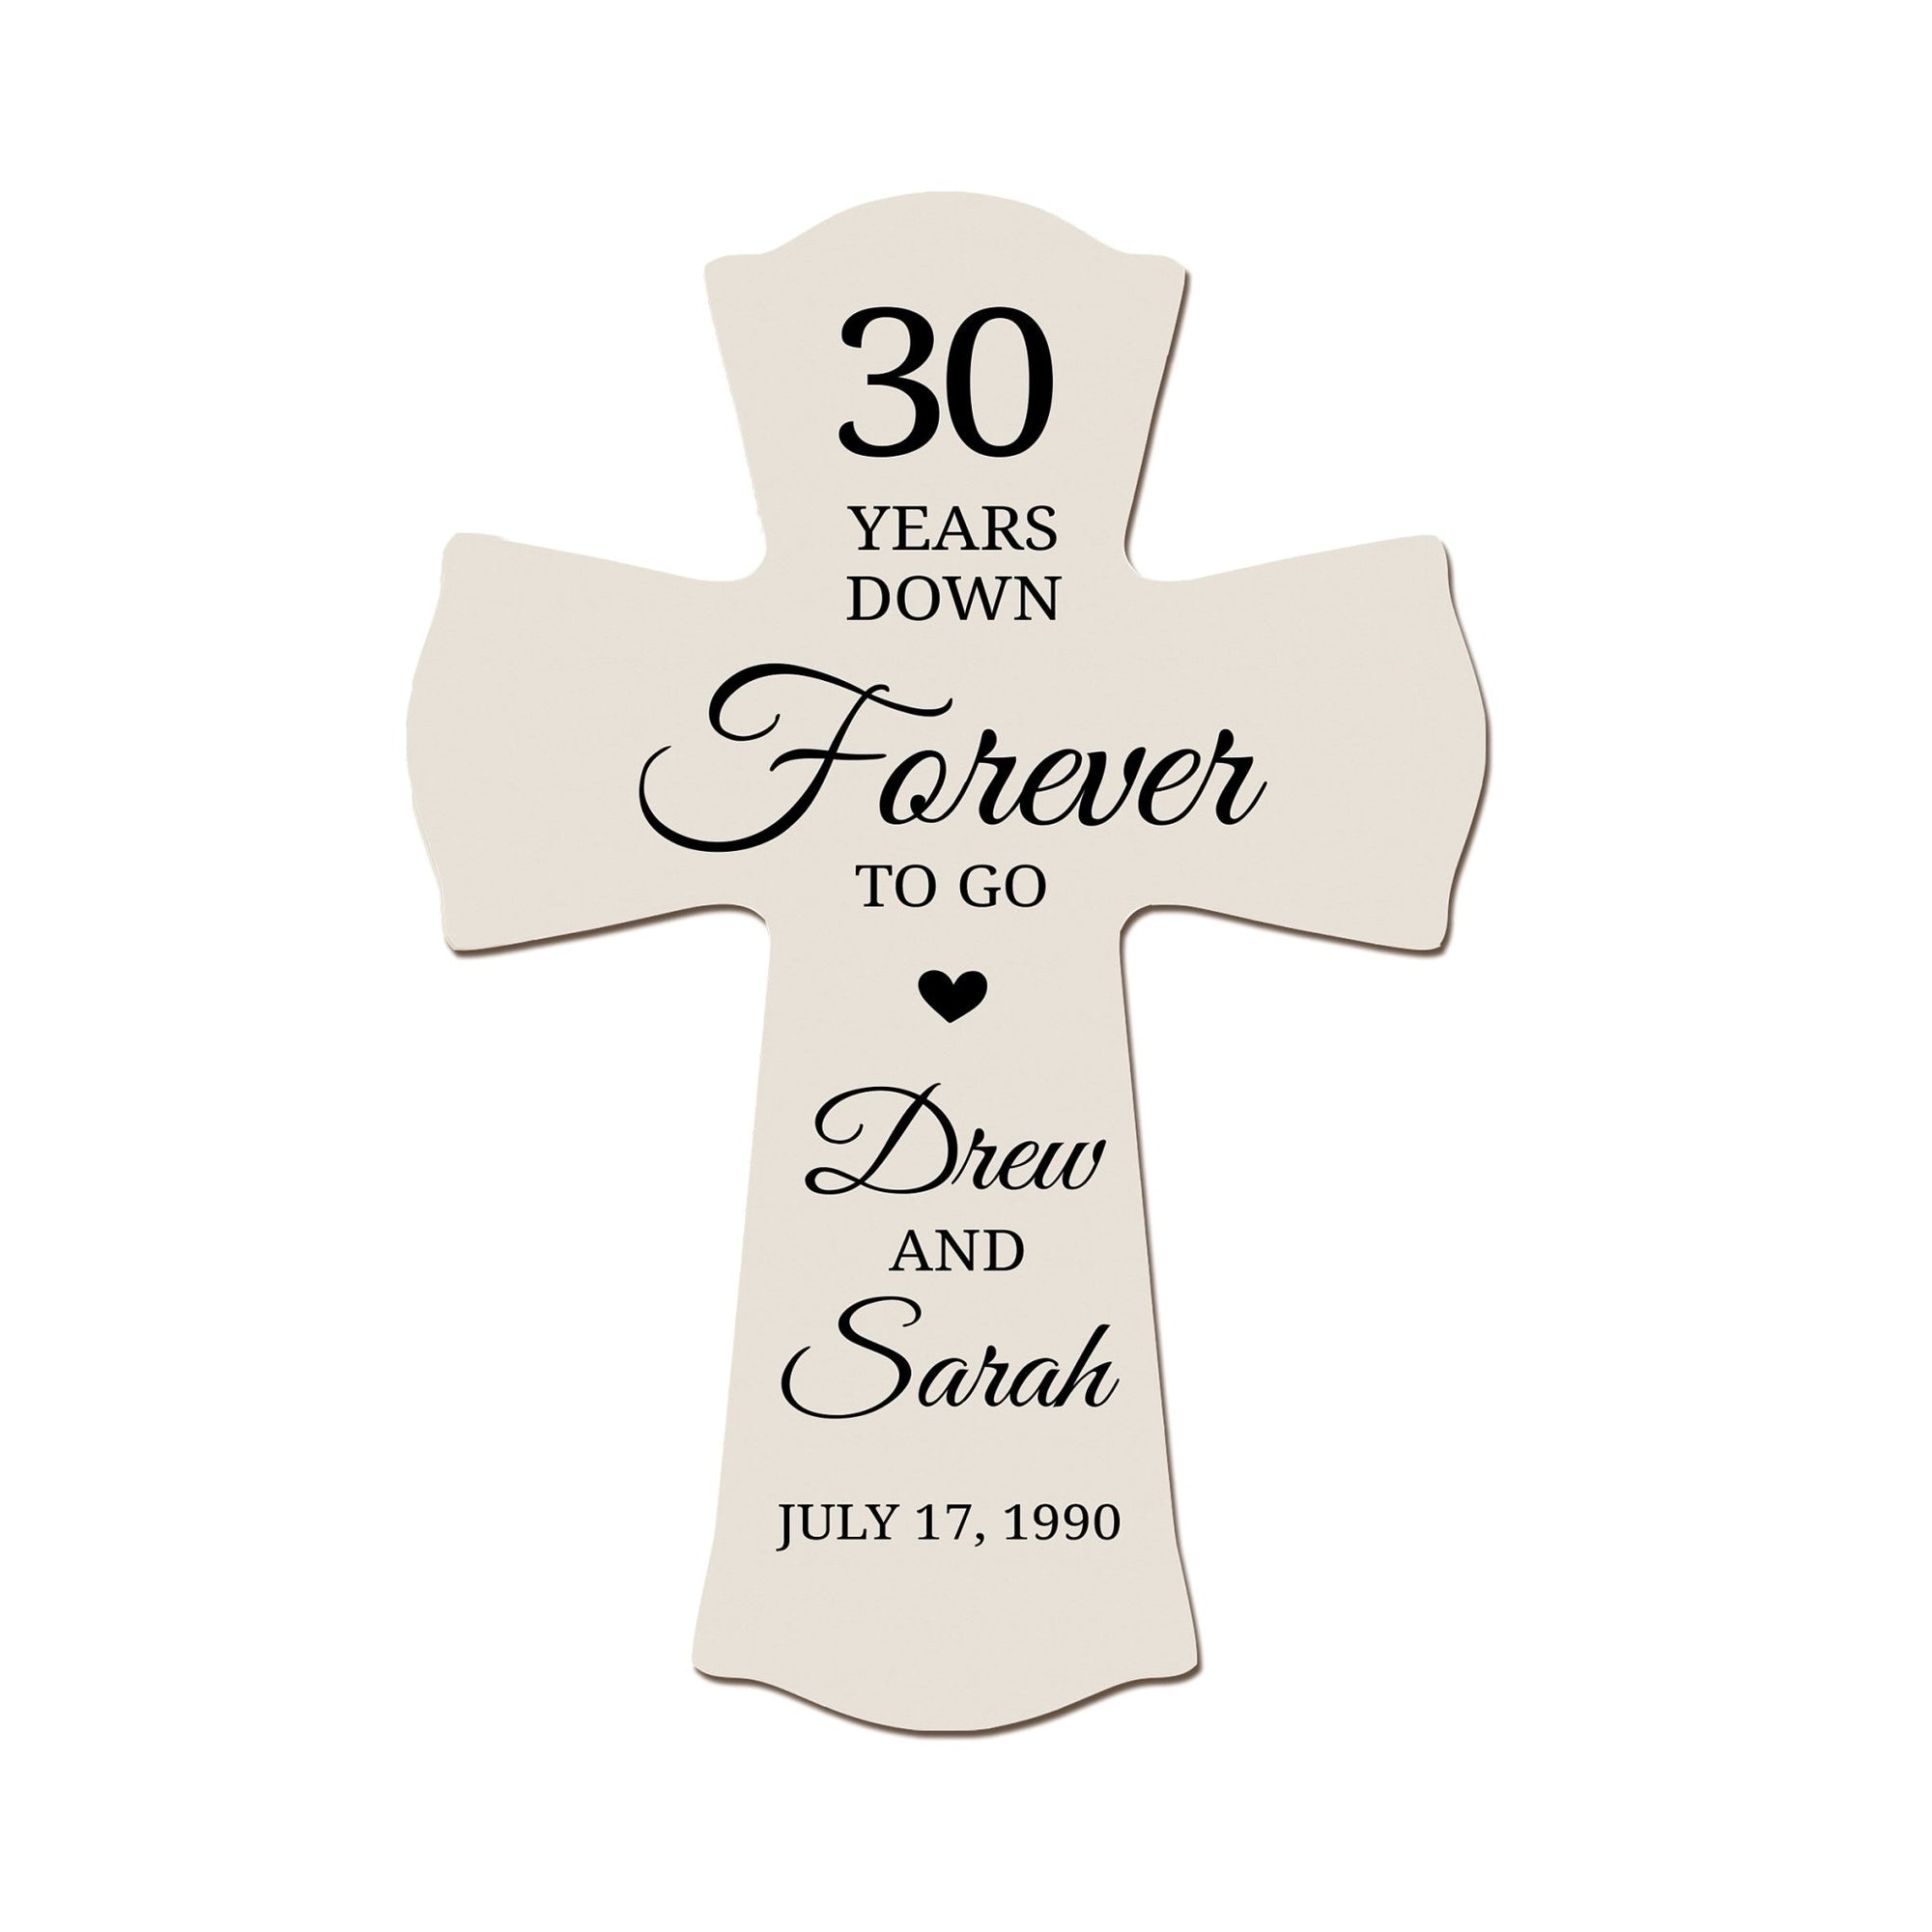 Unique Gifts for Couples - Customized Wall Cross for 30th Wedding Anniversary